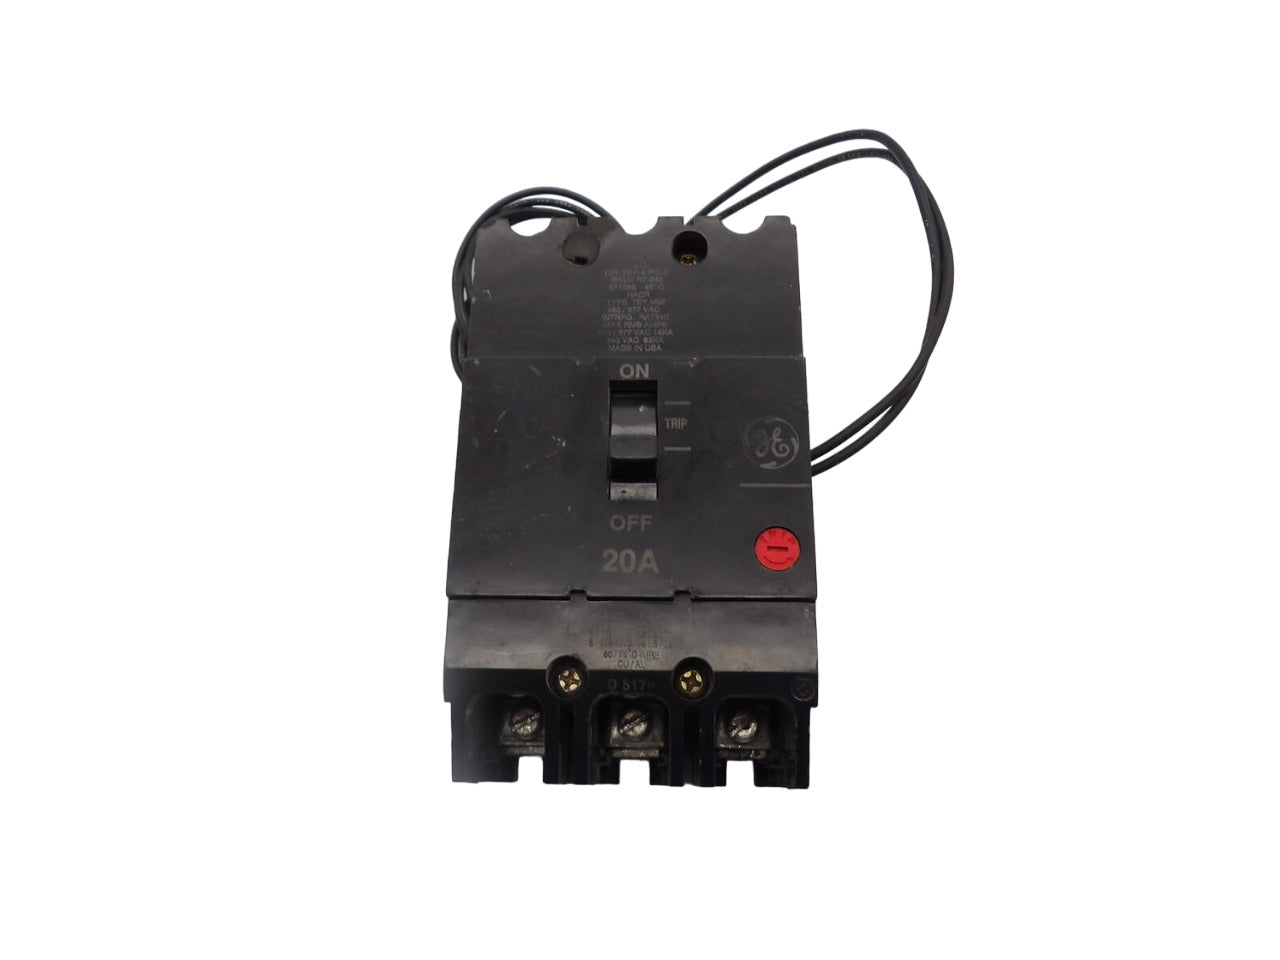 TEY320ST12 - General Electrics - Molded Case Circuit Breakers
